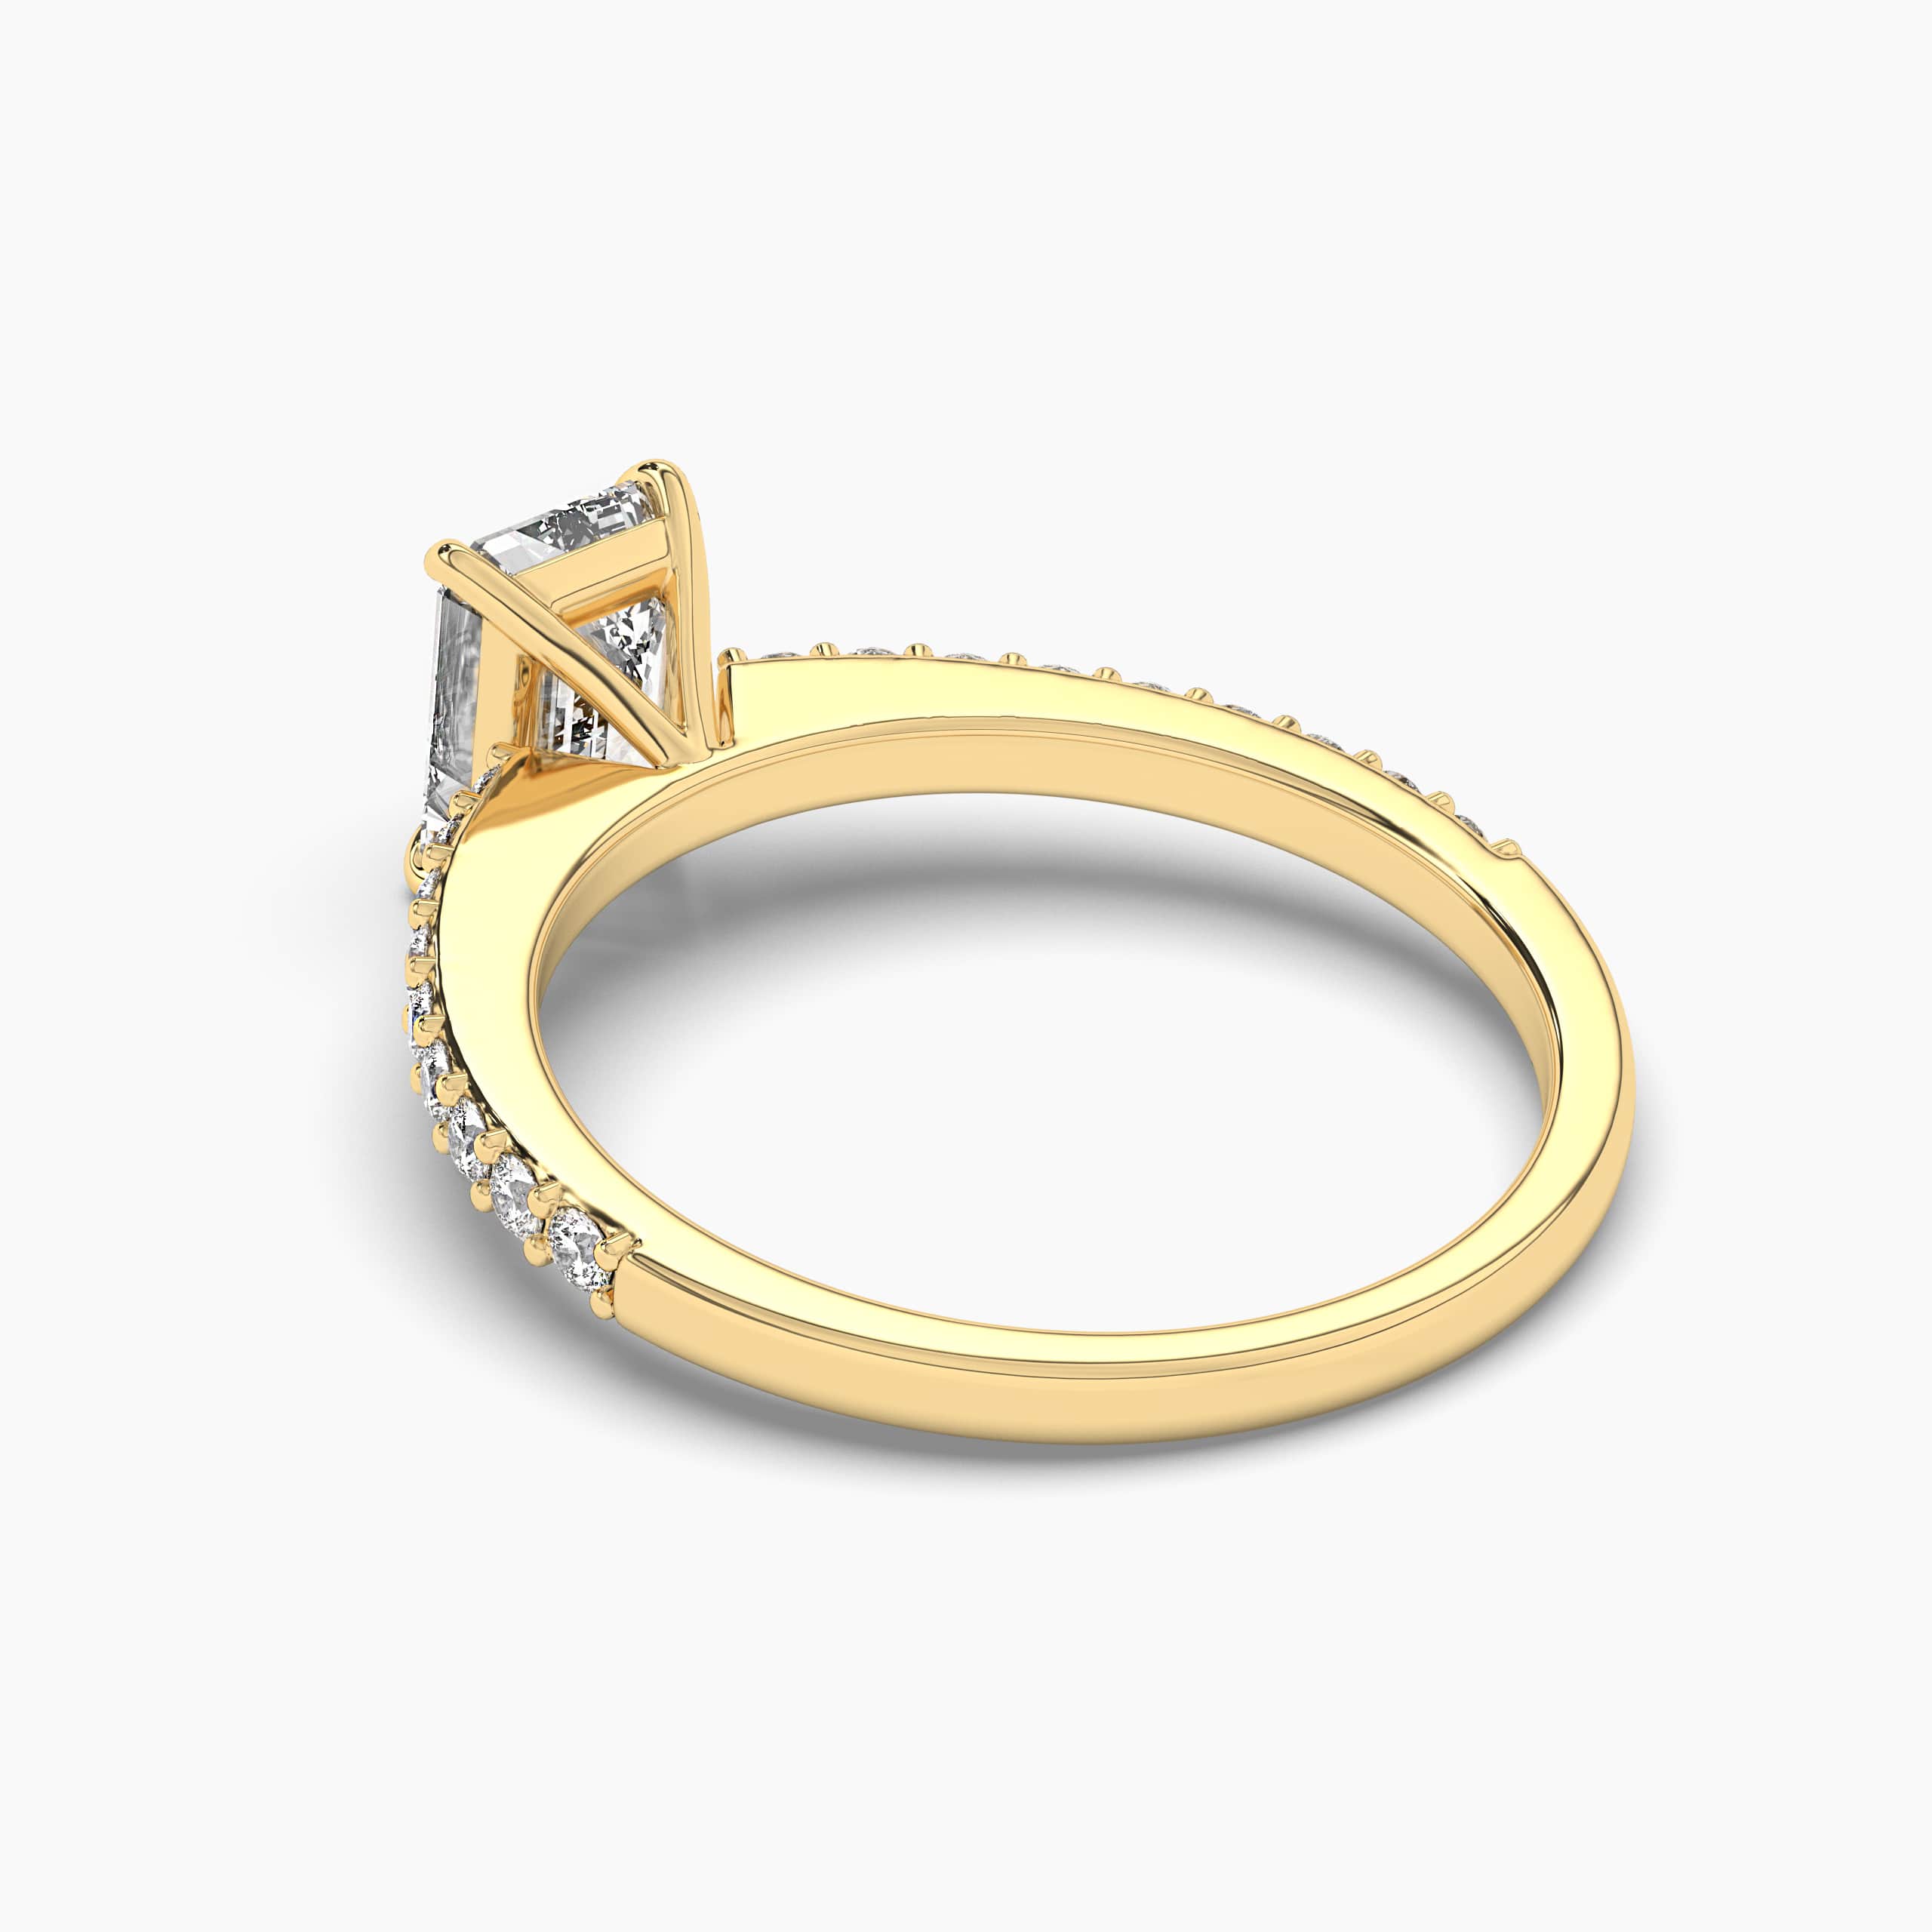 Emerald-Cut Diamond and Yellow Gold Engagement Ring